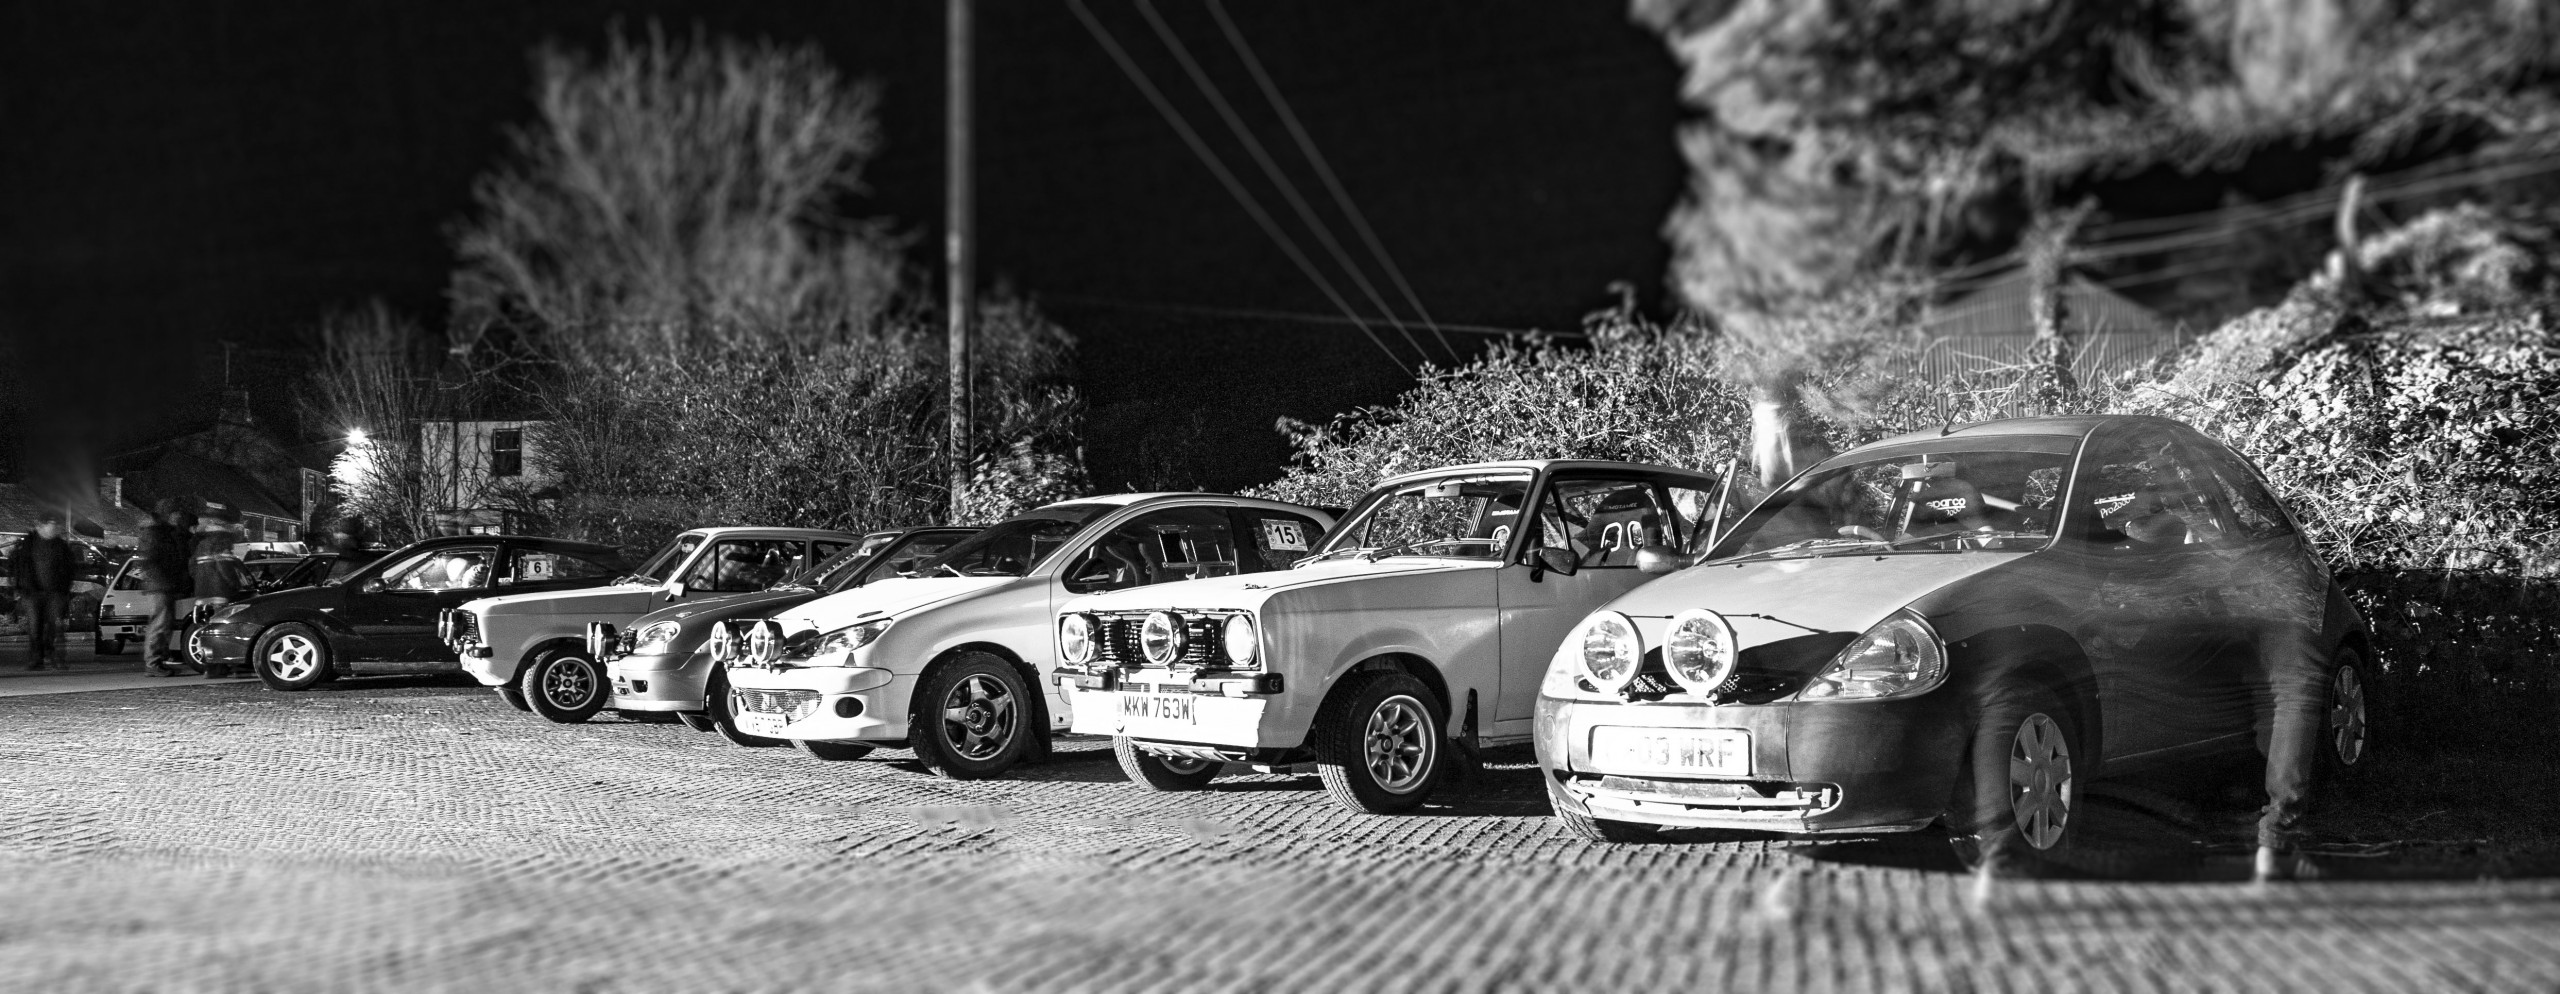 James Trenholme Memorial Rally 2021 Black and White Photo of Rally Cars taken by Experience Photography